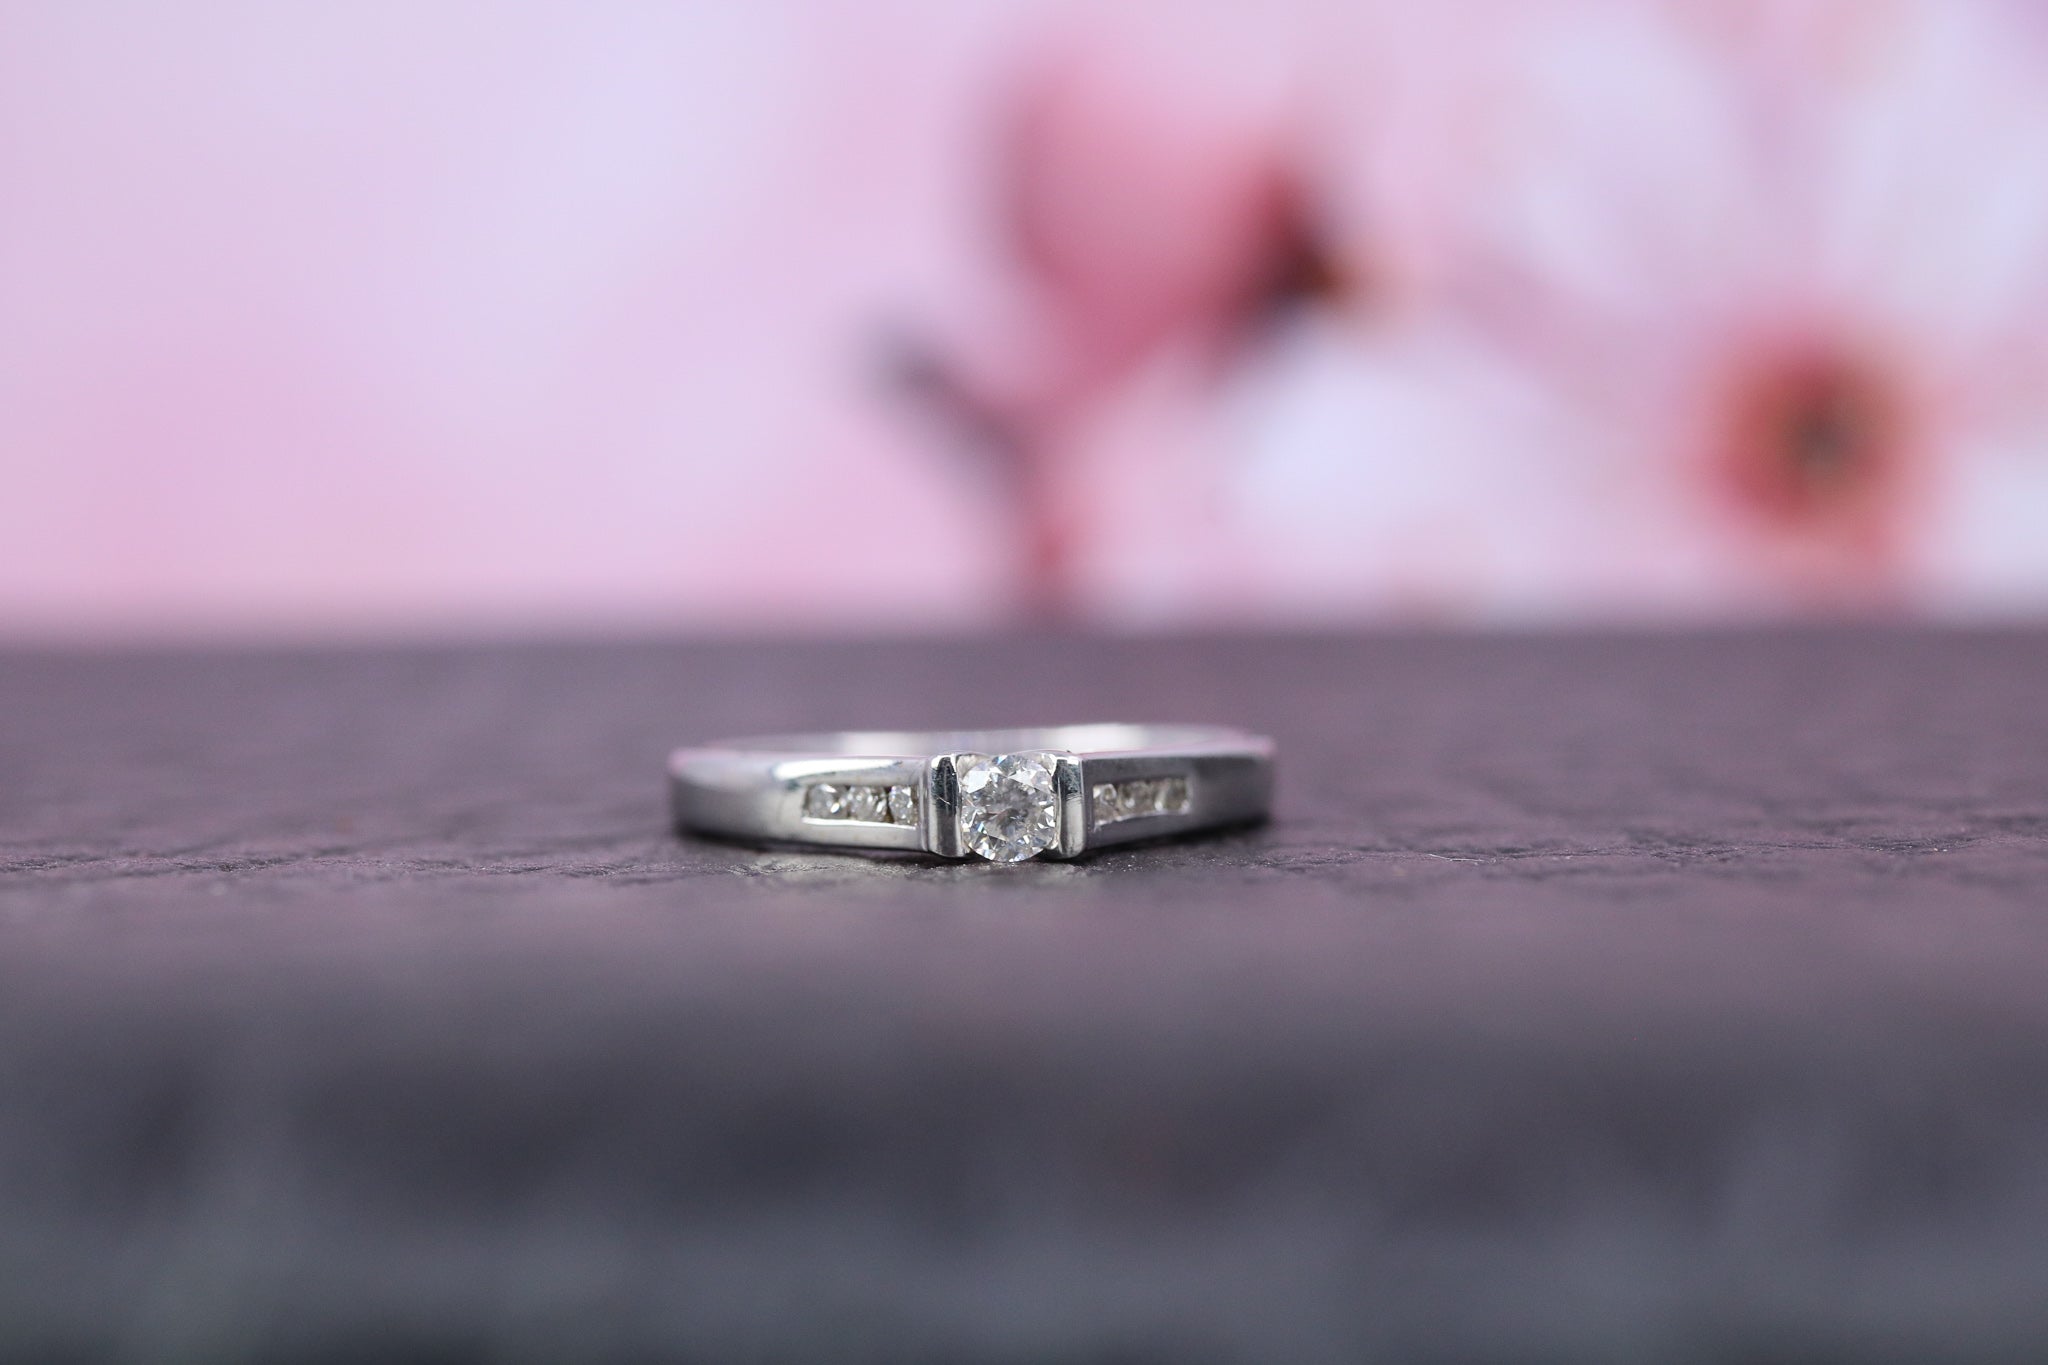 18ct White Gold & Diamond Ring - W6064 - Hallmark Jewellers Formby & The Jewellers Bench Widnes